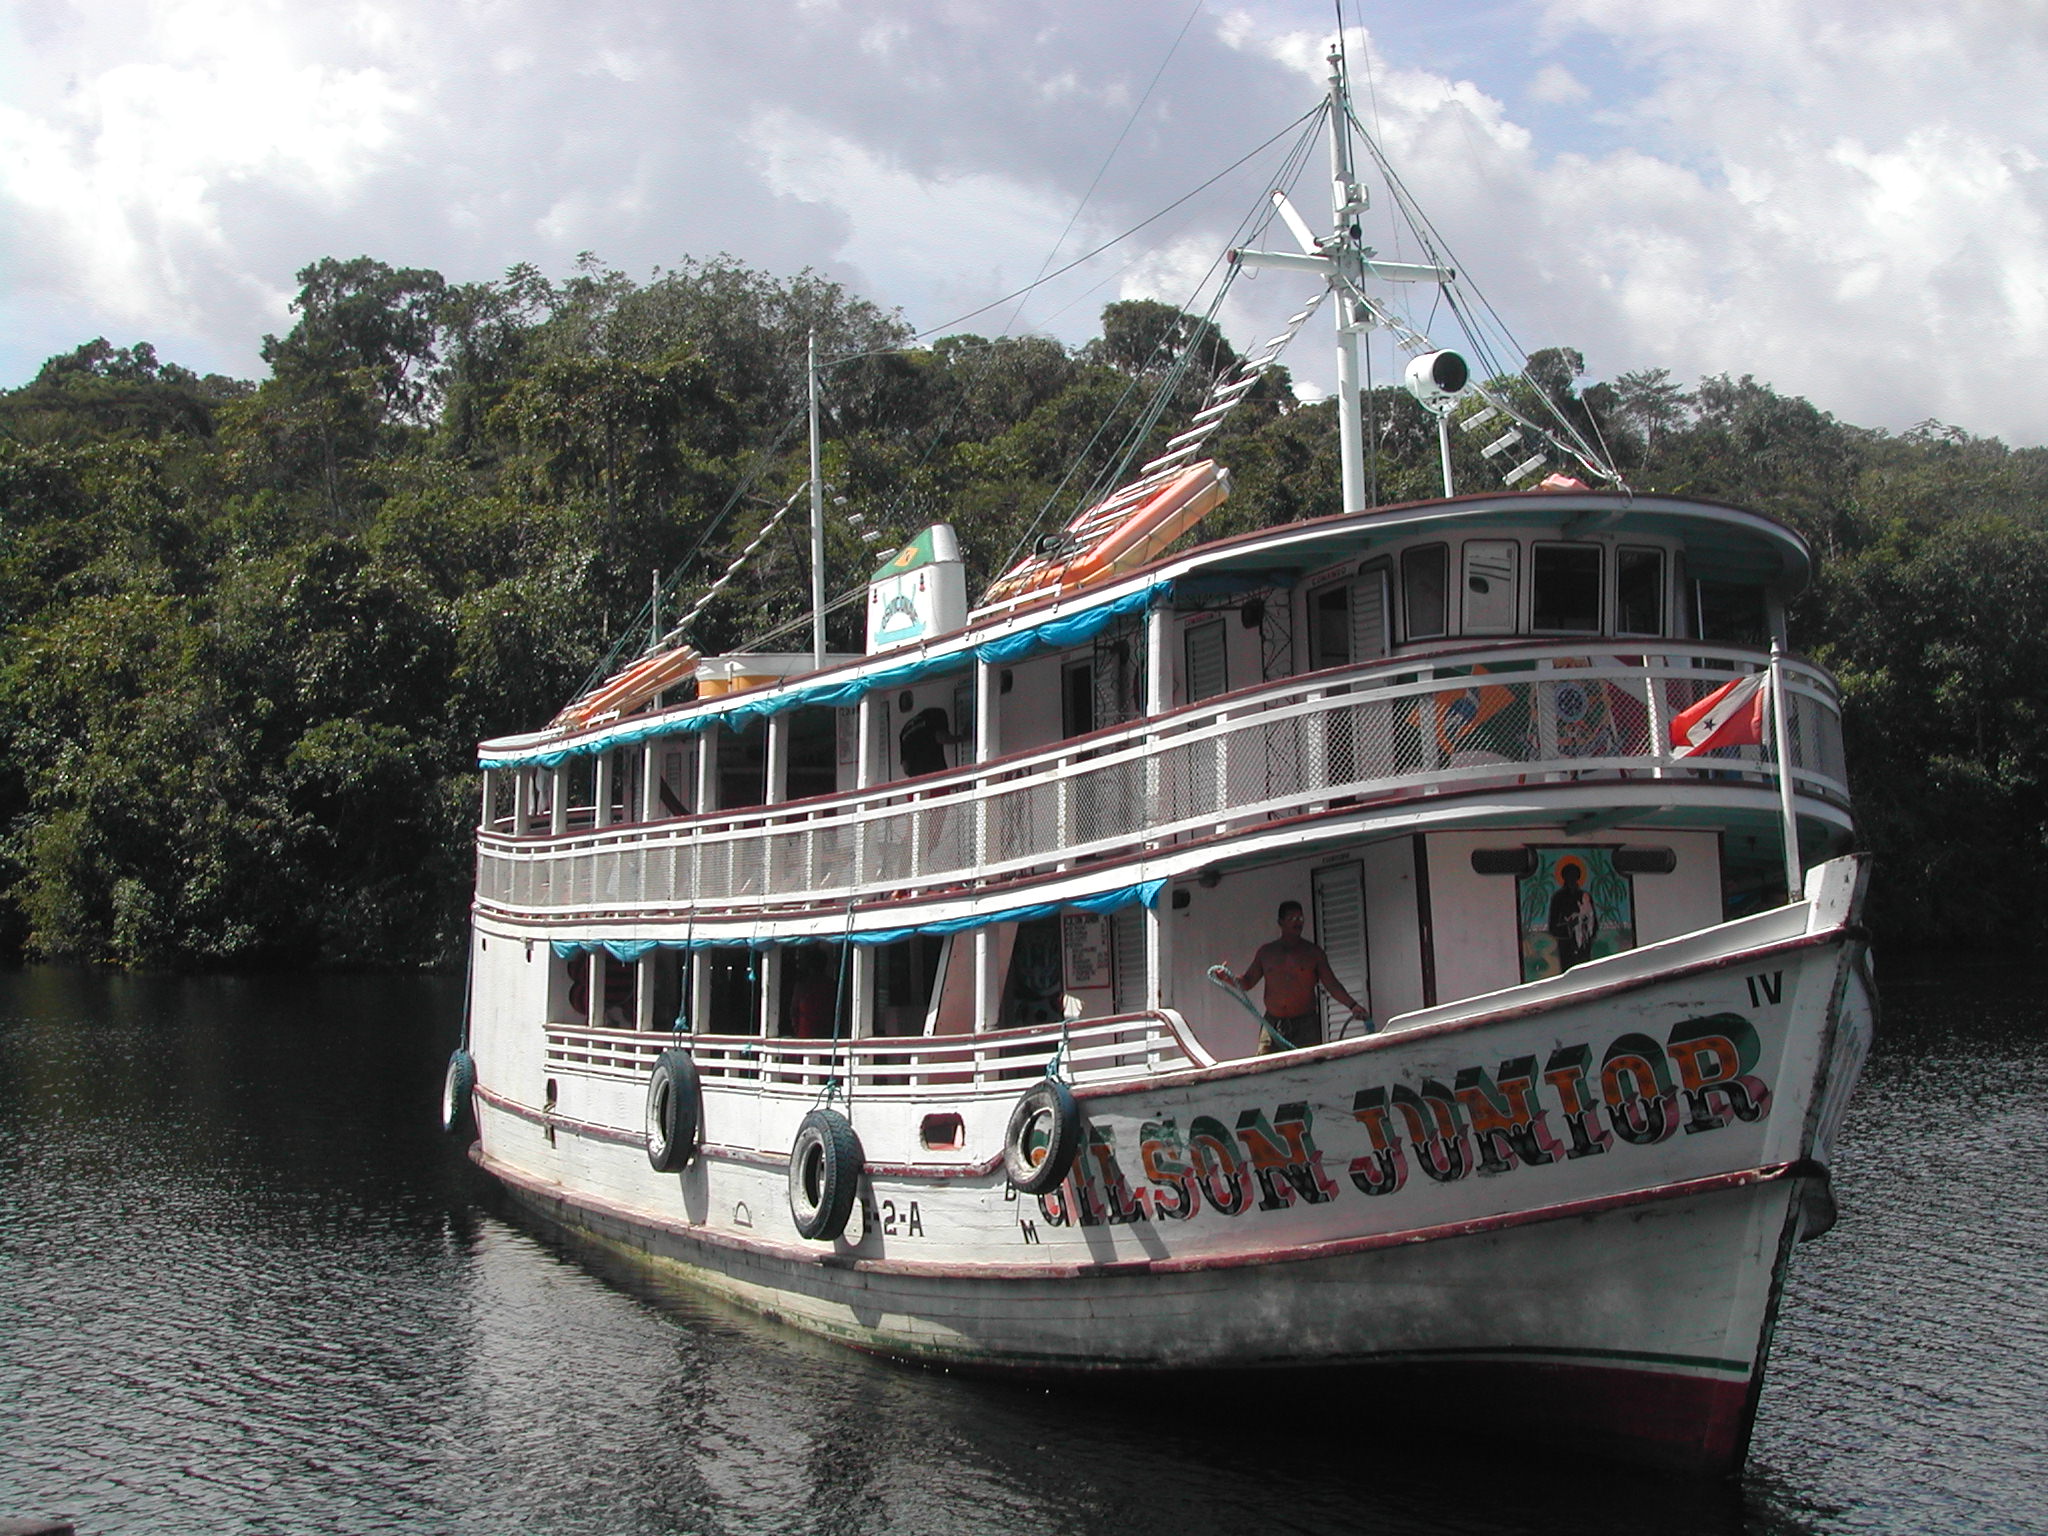 A large boat on the amazon river, with trees behind. Its name is painted on the side in bright colours, "Gilson Junior," and there are two people on the deck.